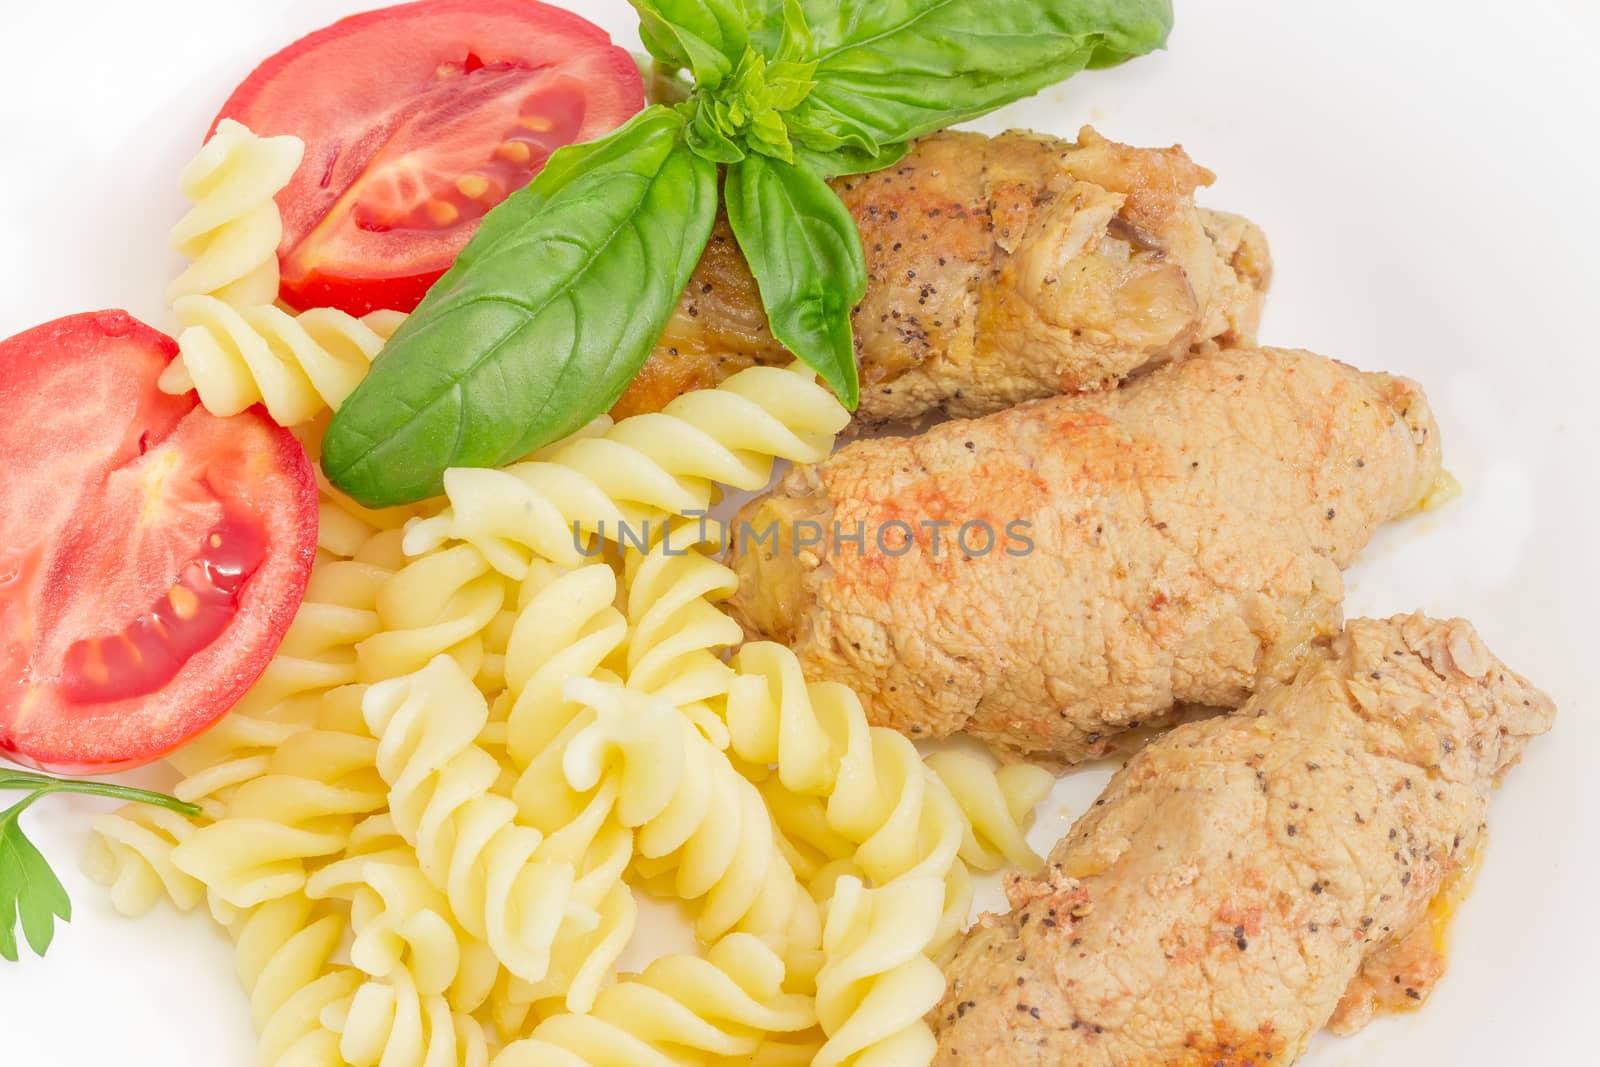 Top view of the braised stuffed meat roulades, spiral pasta and tomato, decorated with basil and parsley twigs closeup
